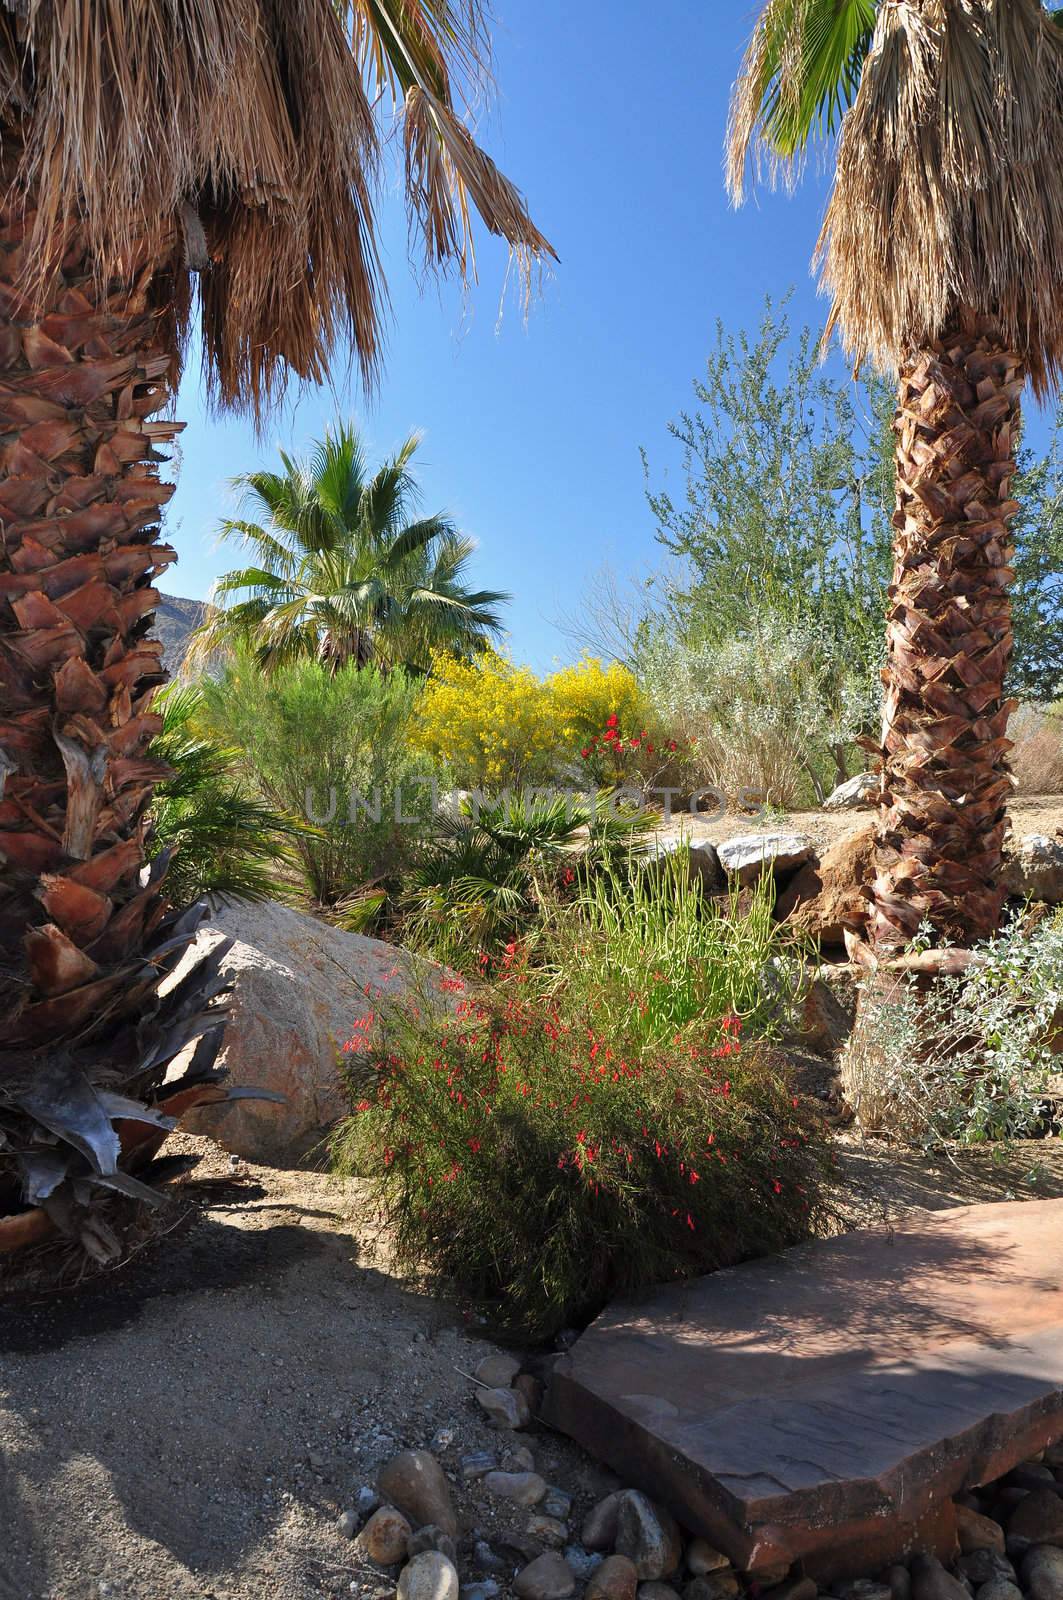 Wildflowers and palm trees mix with cactus at this desert garden park in Palm Desert, California.